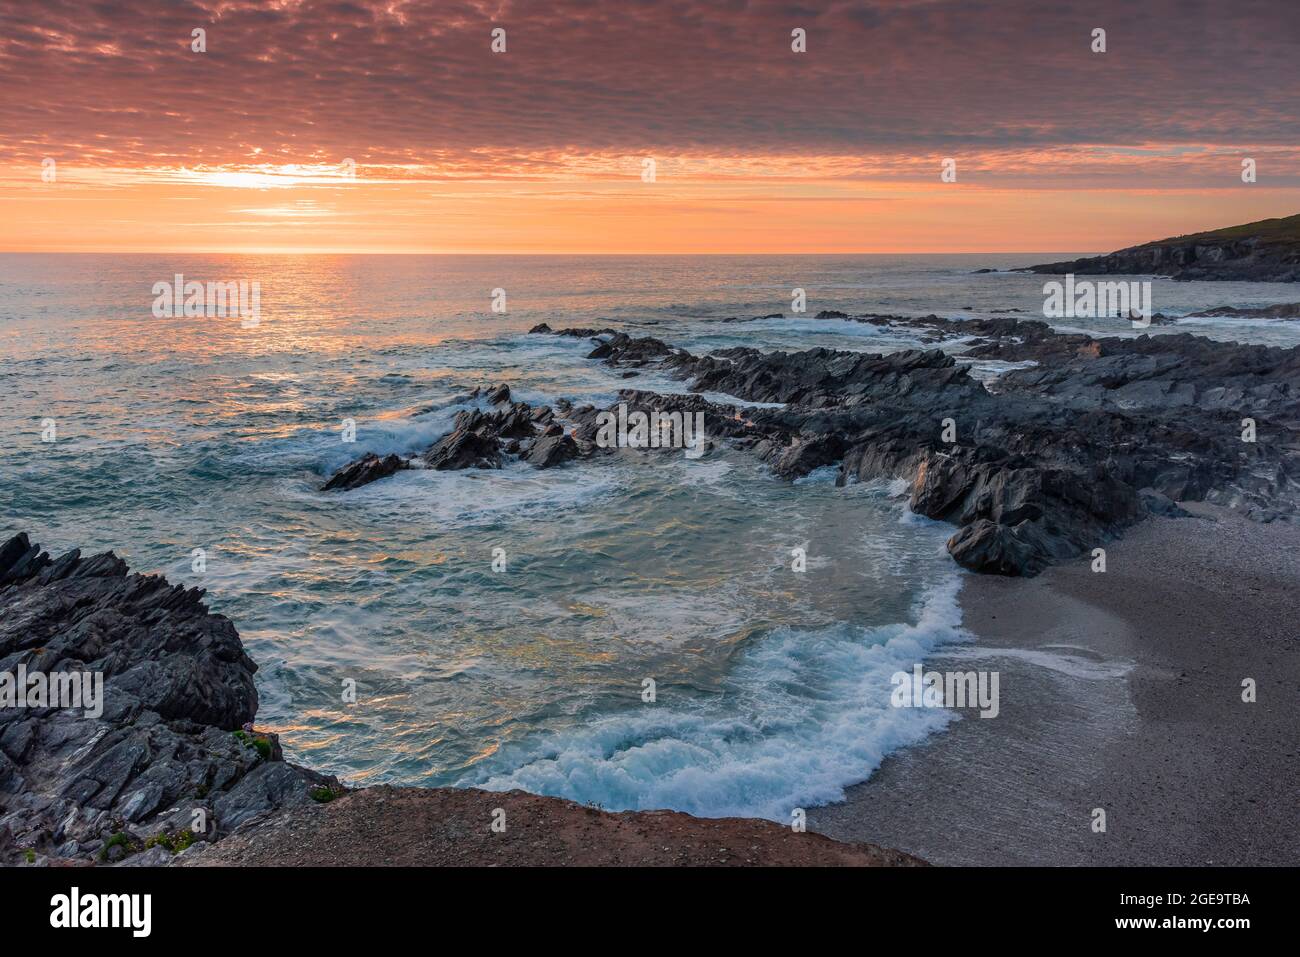 A spectacular sunset over Fistral Bay on the coast of Newquay in Cornwall. Stock Photo